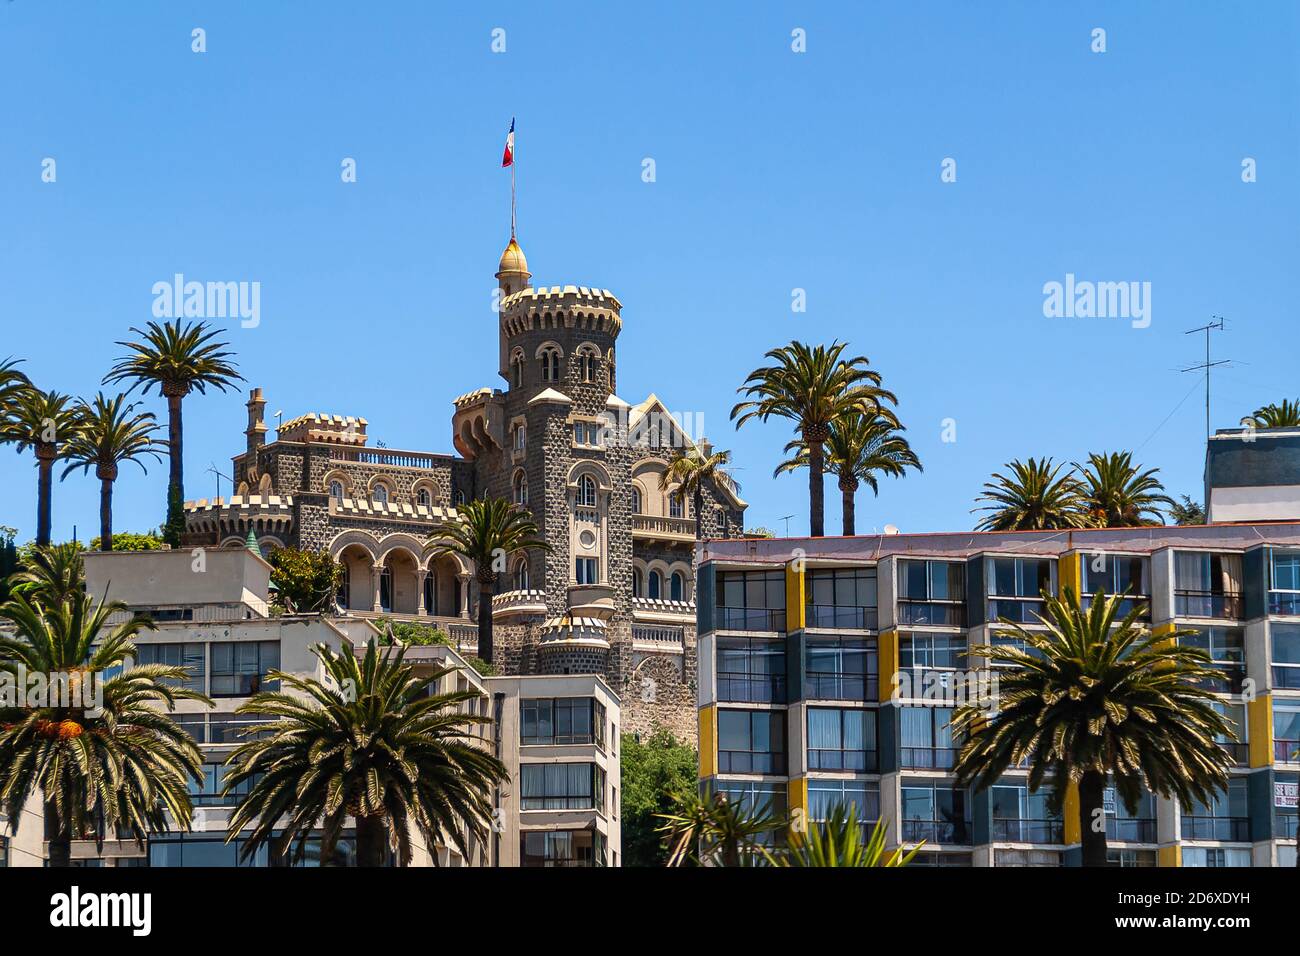 Campo restante yo Vina Del Mar, Chile - December 8, 2008: Closeup of dark stone with beige  trim Wulff Castle under blue sky towering over luxury apartment building.  Gre Stock Photo - Alamy